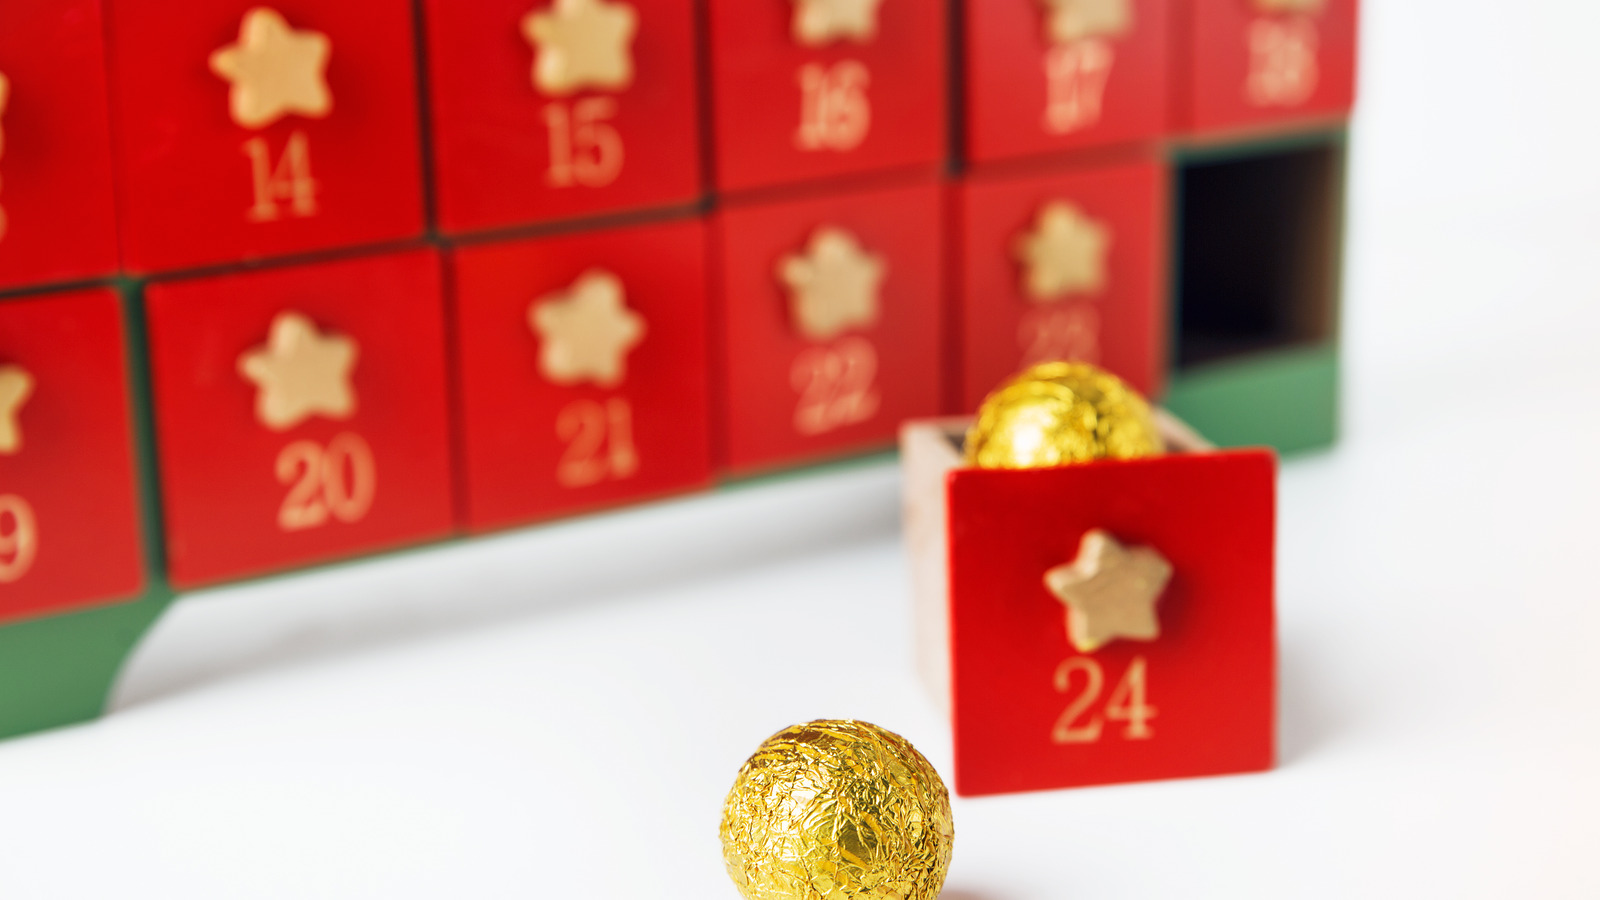 Lidl Advent Calendar Recall: The Salmonella Risk You Should Know About